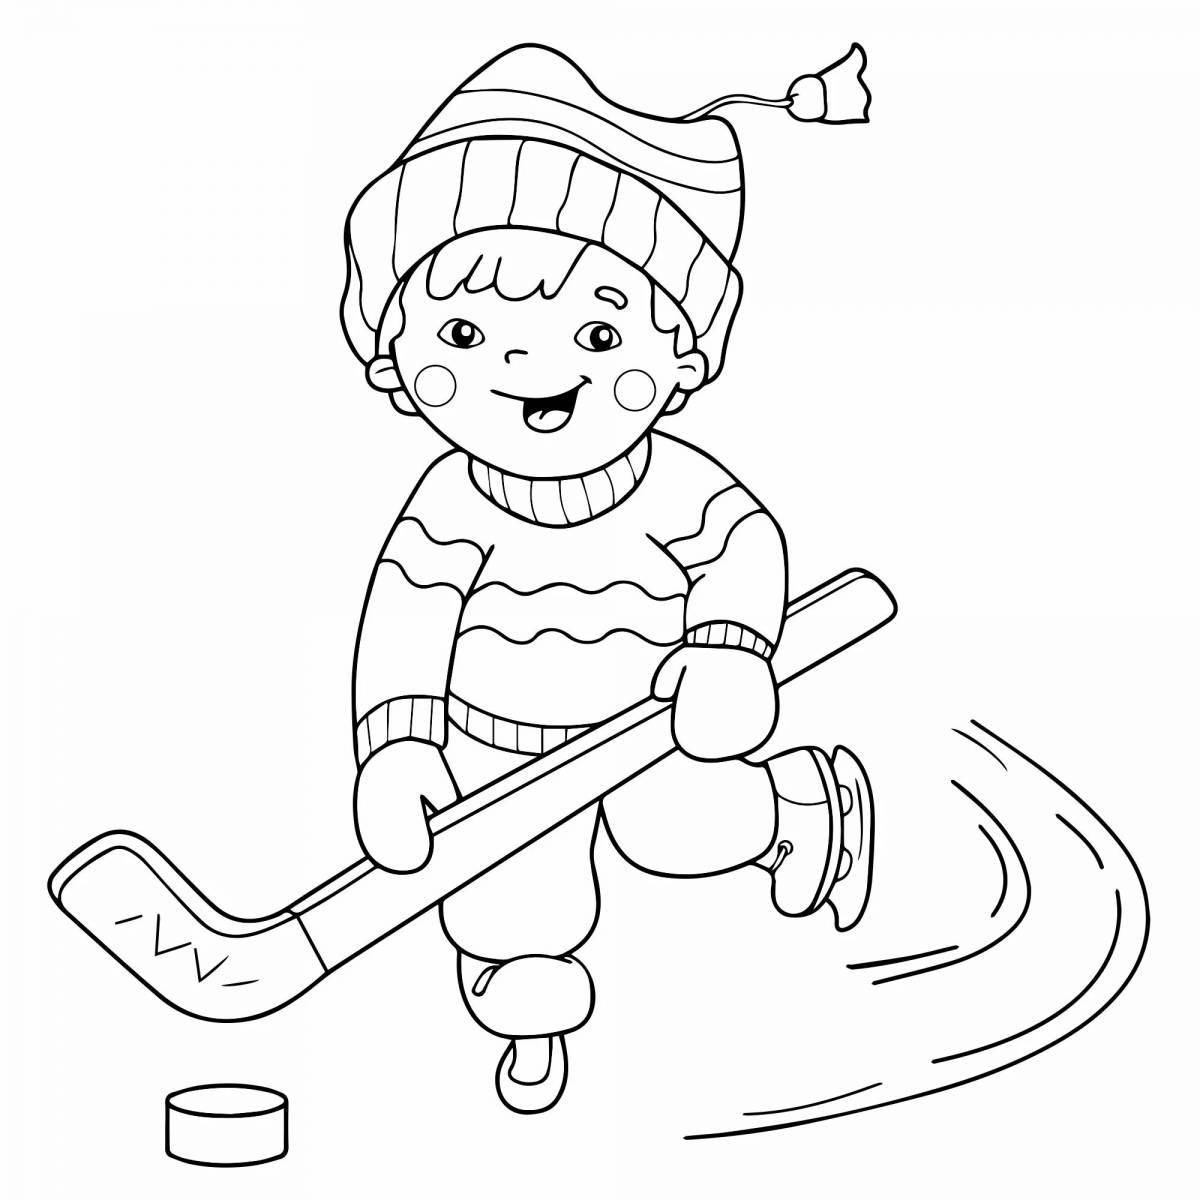 Adorable winter sports coloring book for kids